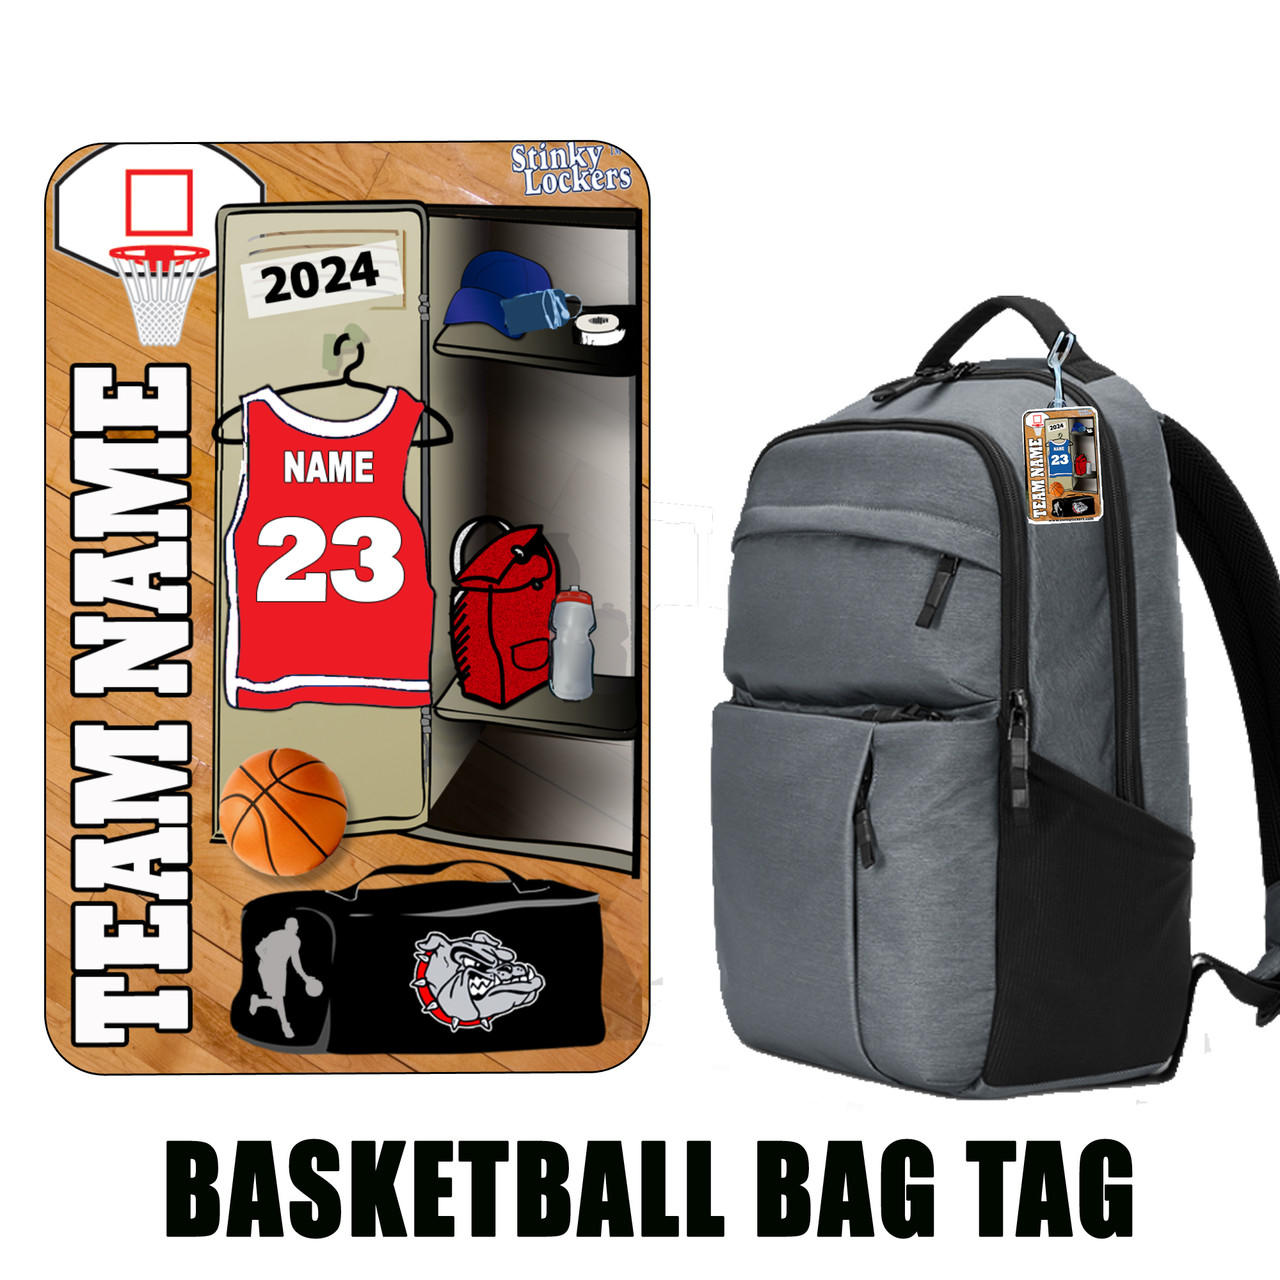 Personalized Basketball Luggage Tag with Loop Questions & Answers